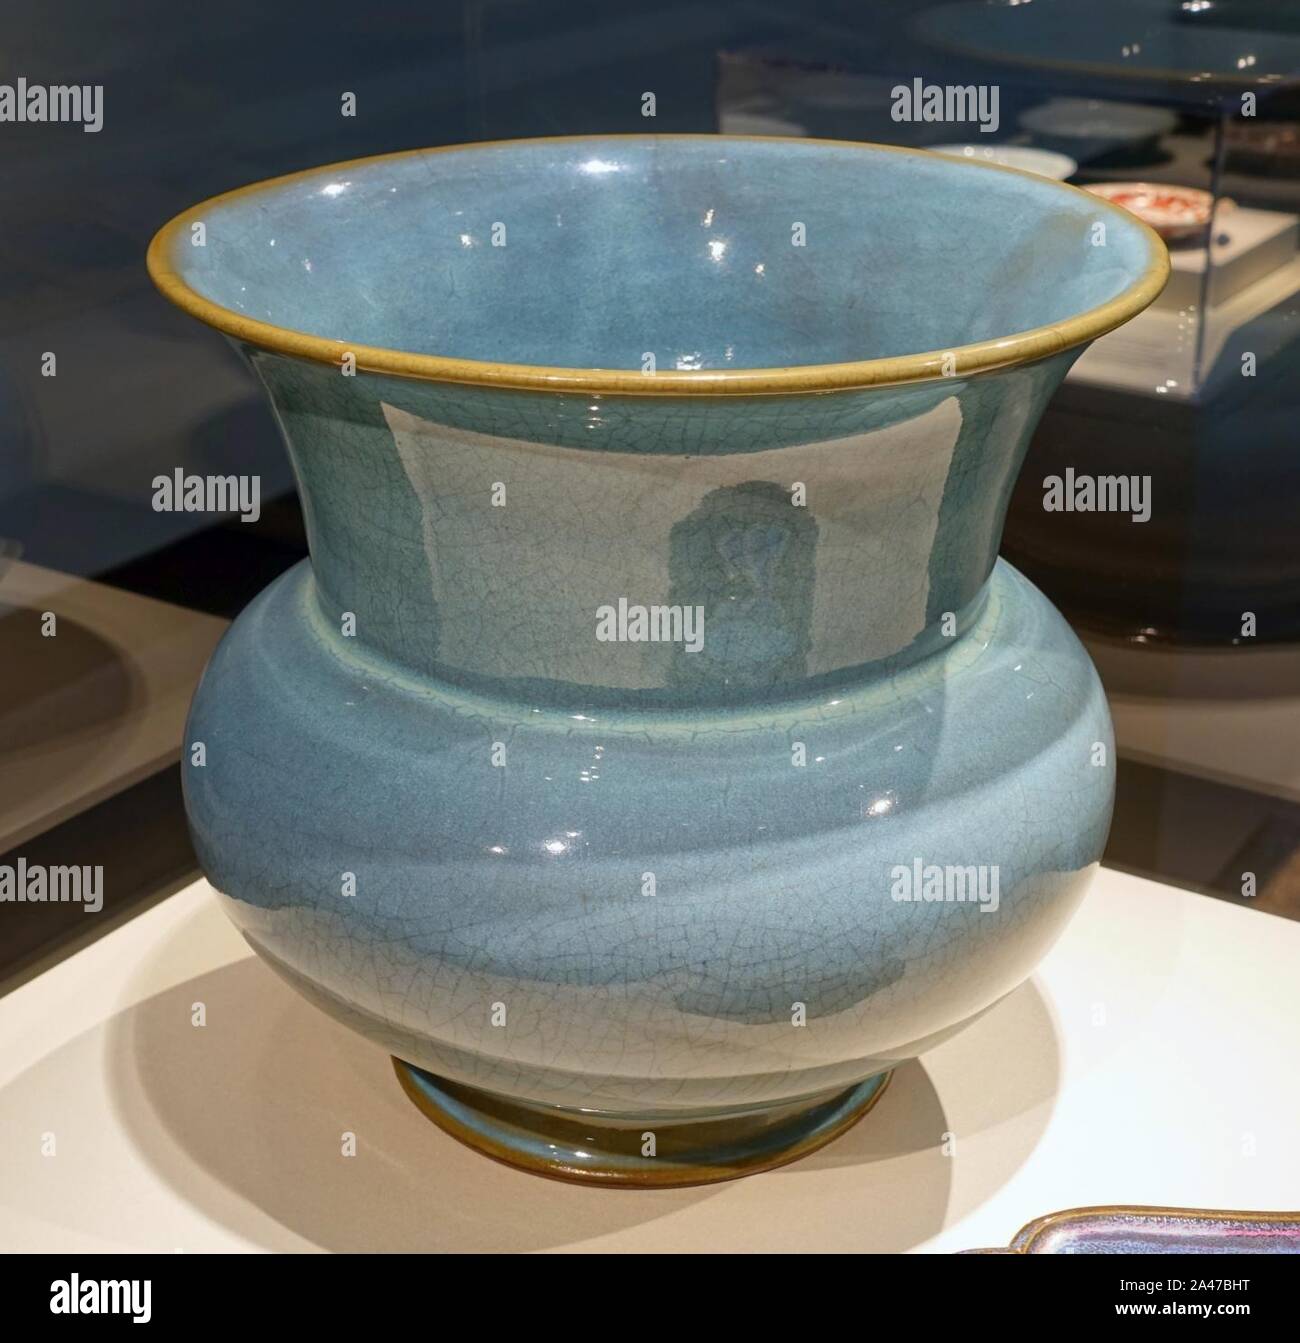 Flowerpot with incised number 1, China, Henan province, Yuxian, Juntai, Ming dynasty, early 1400s AD, stoneware, Jun glaze Stock Photo